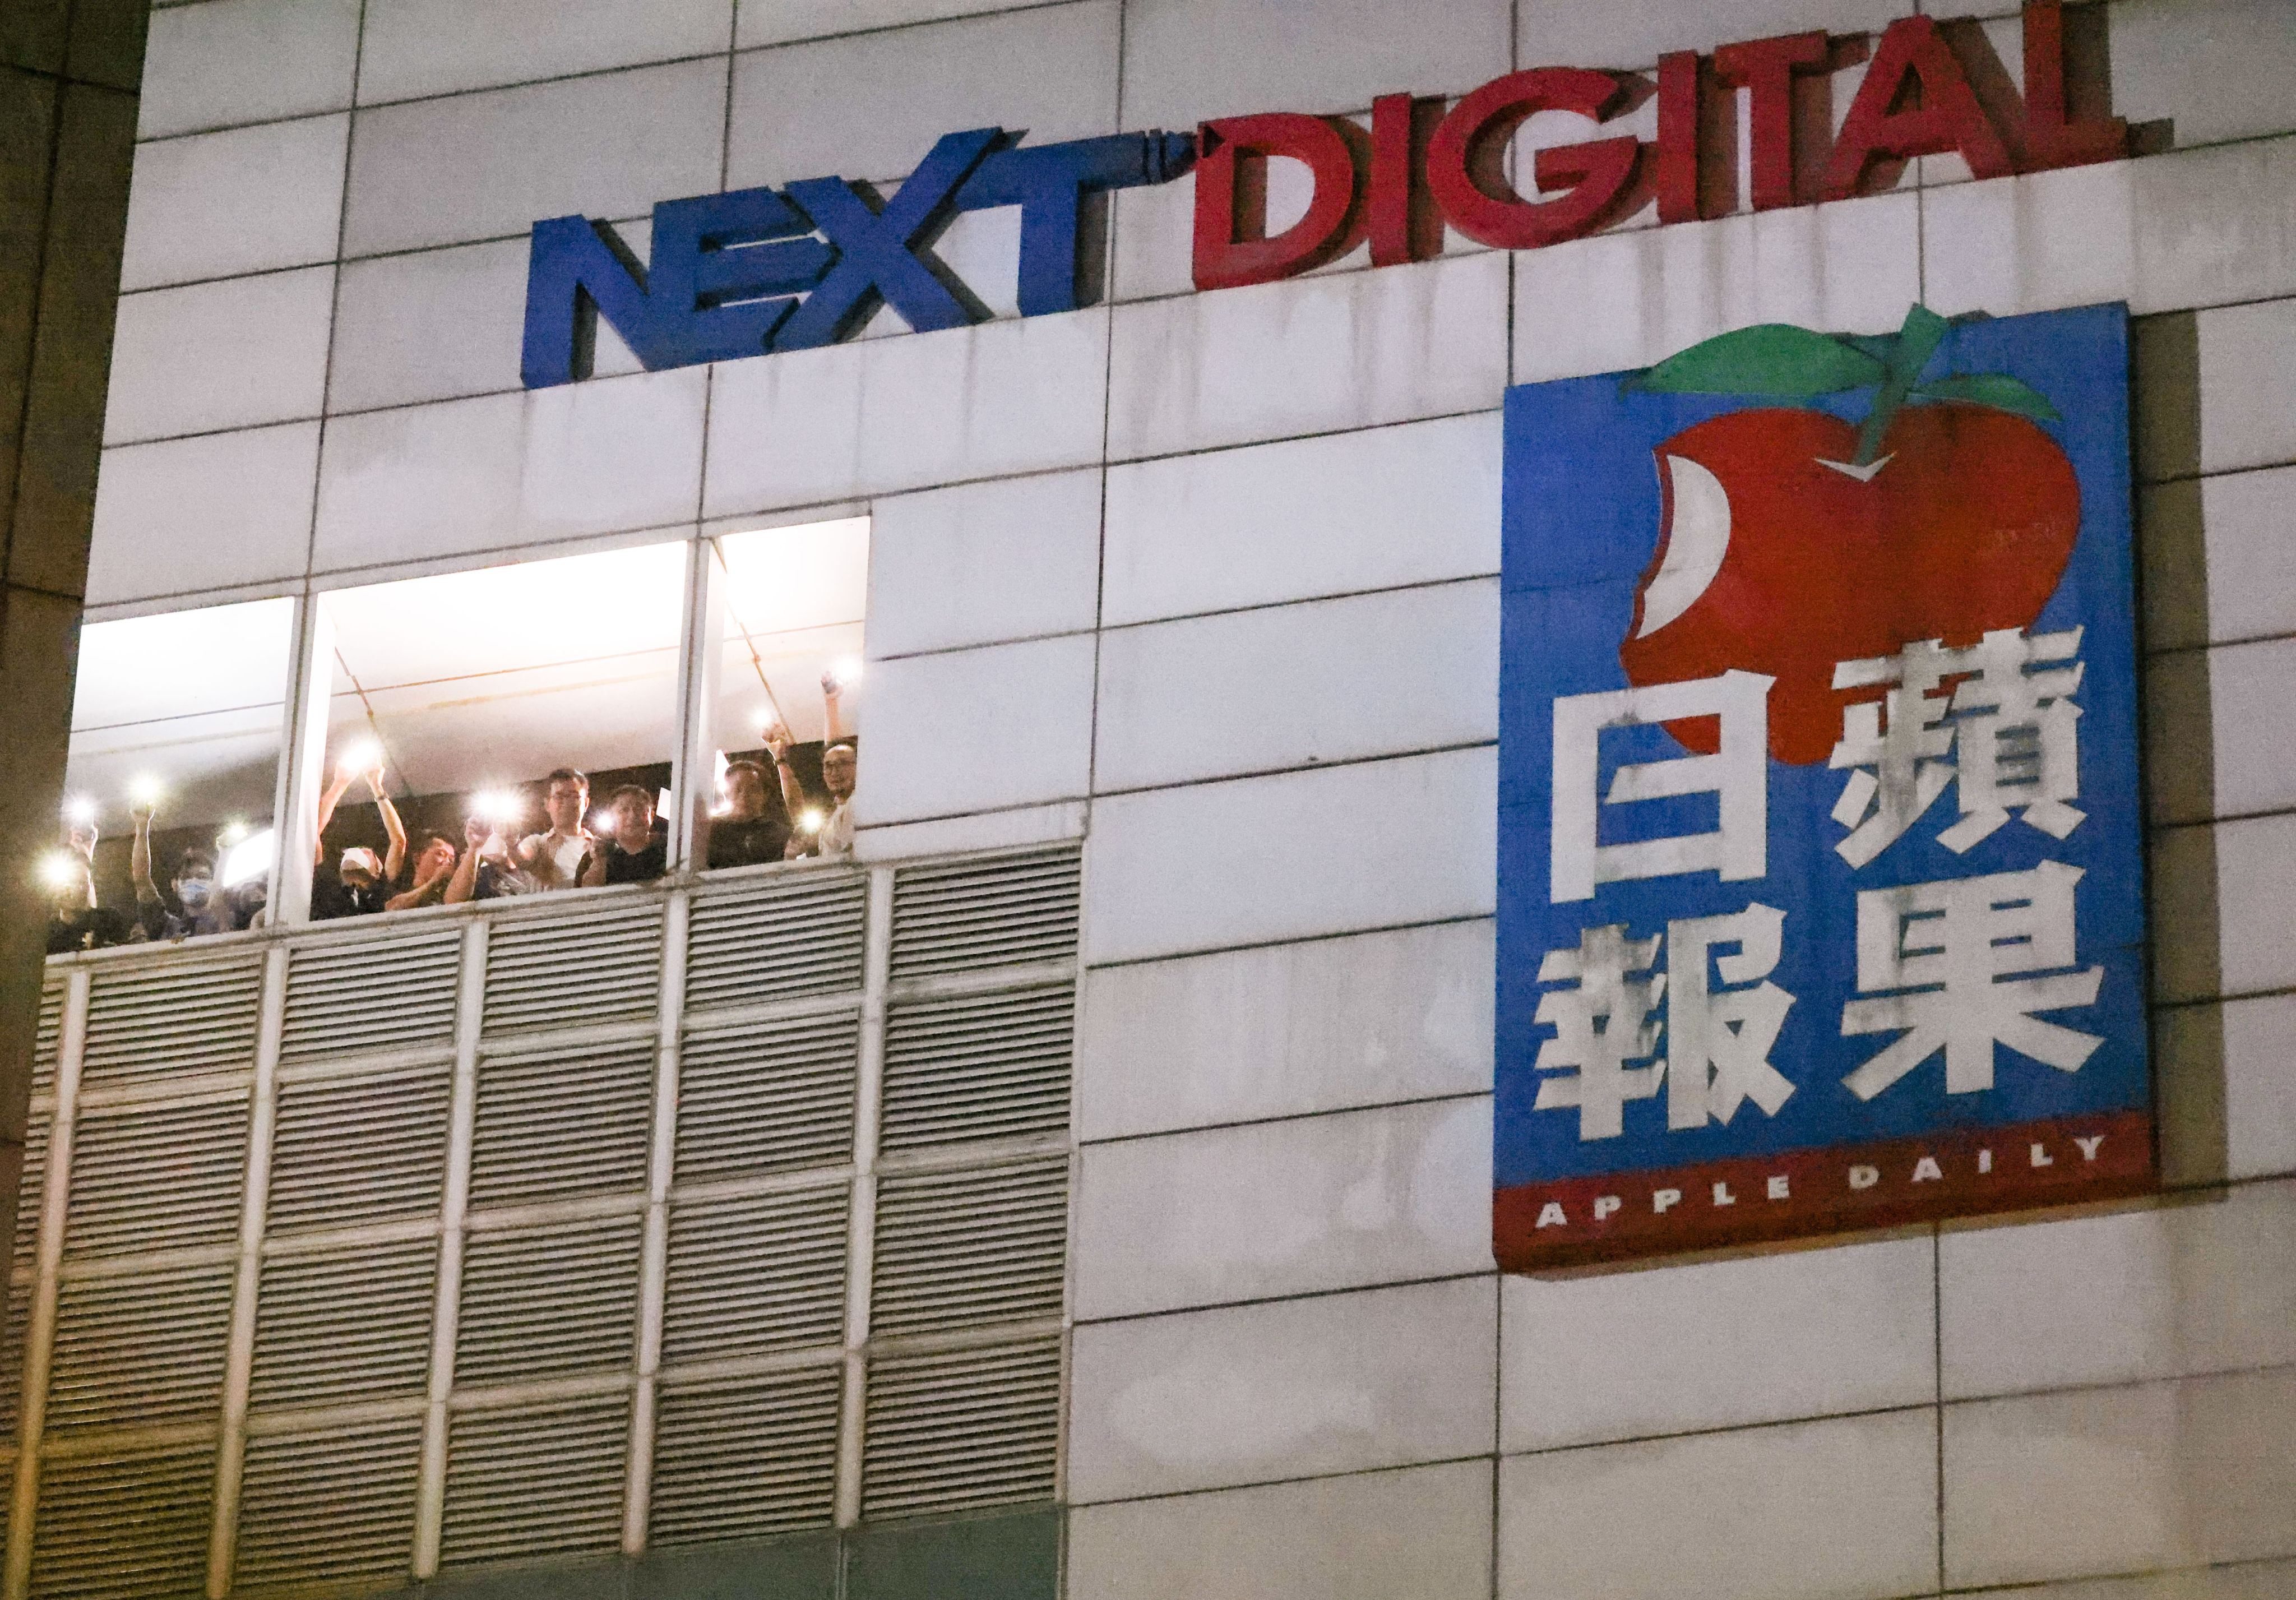 Next Digital is now subject to a High Court winding up order. Photo: Dickson Lee